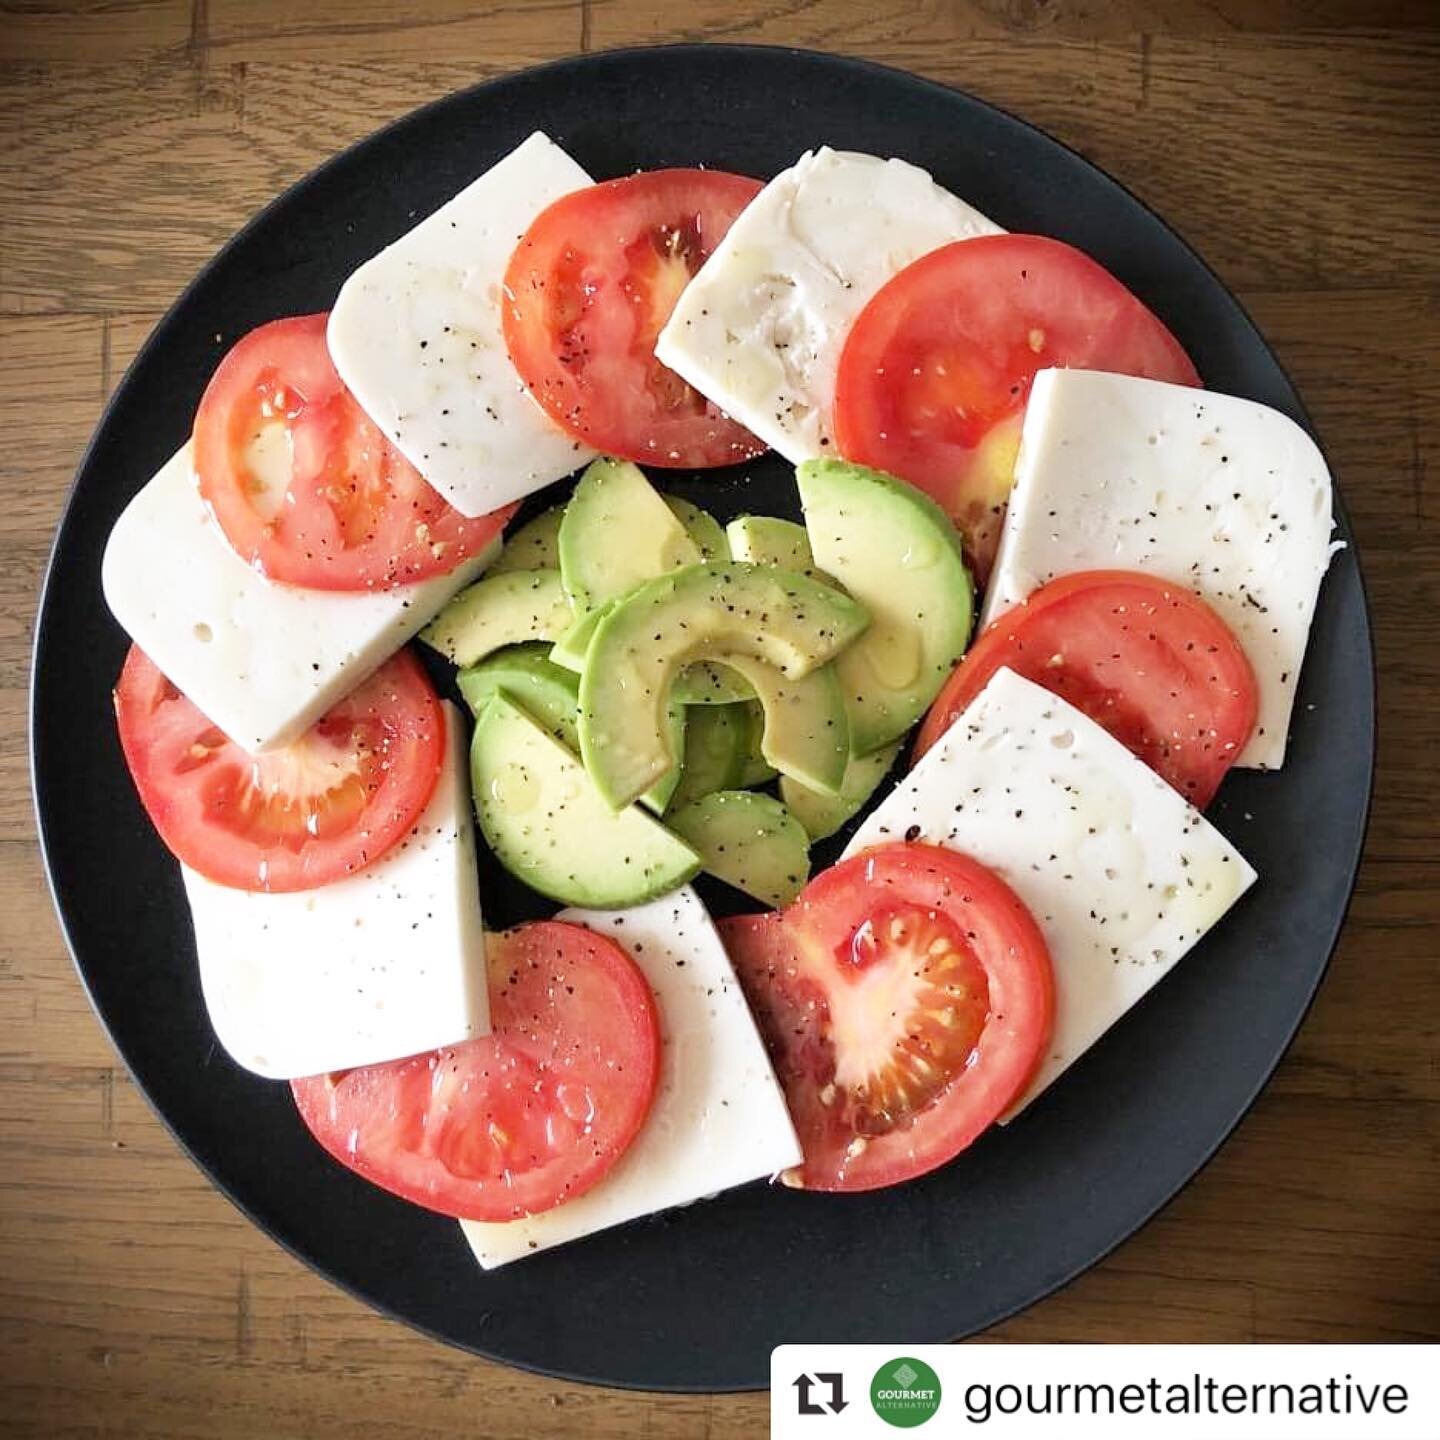 If you&rsquo;re following us from outside Edinburgh, you can order our cheese and in our opinion the best selection of artisan vegan cheese alternatives from @gourmetalternative &lsquo;s website. They also do markets down South, so check them out if 